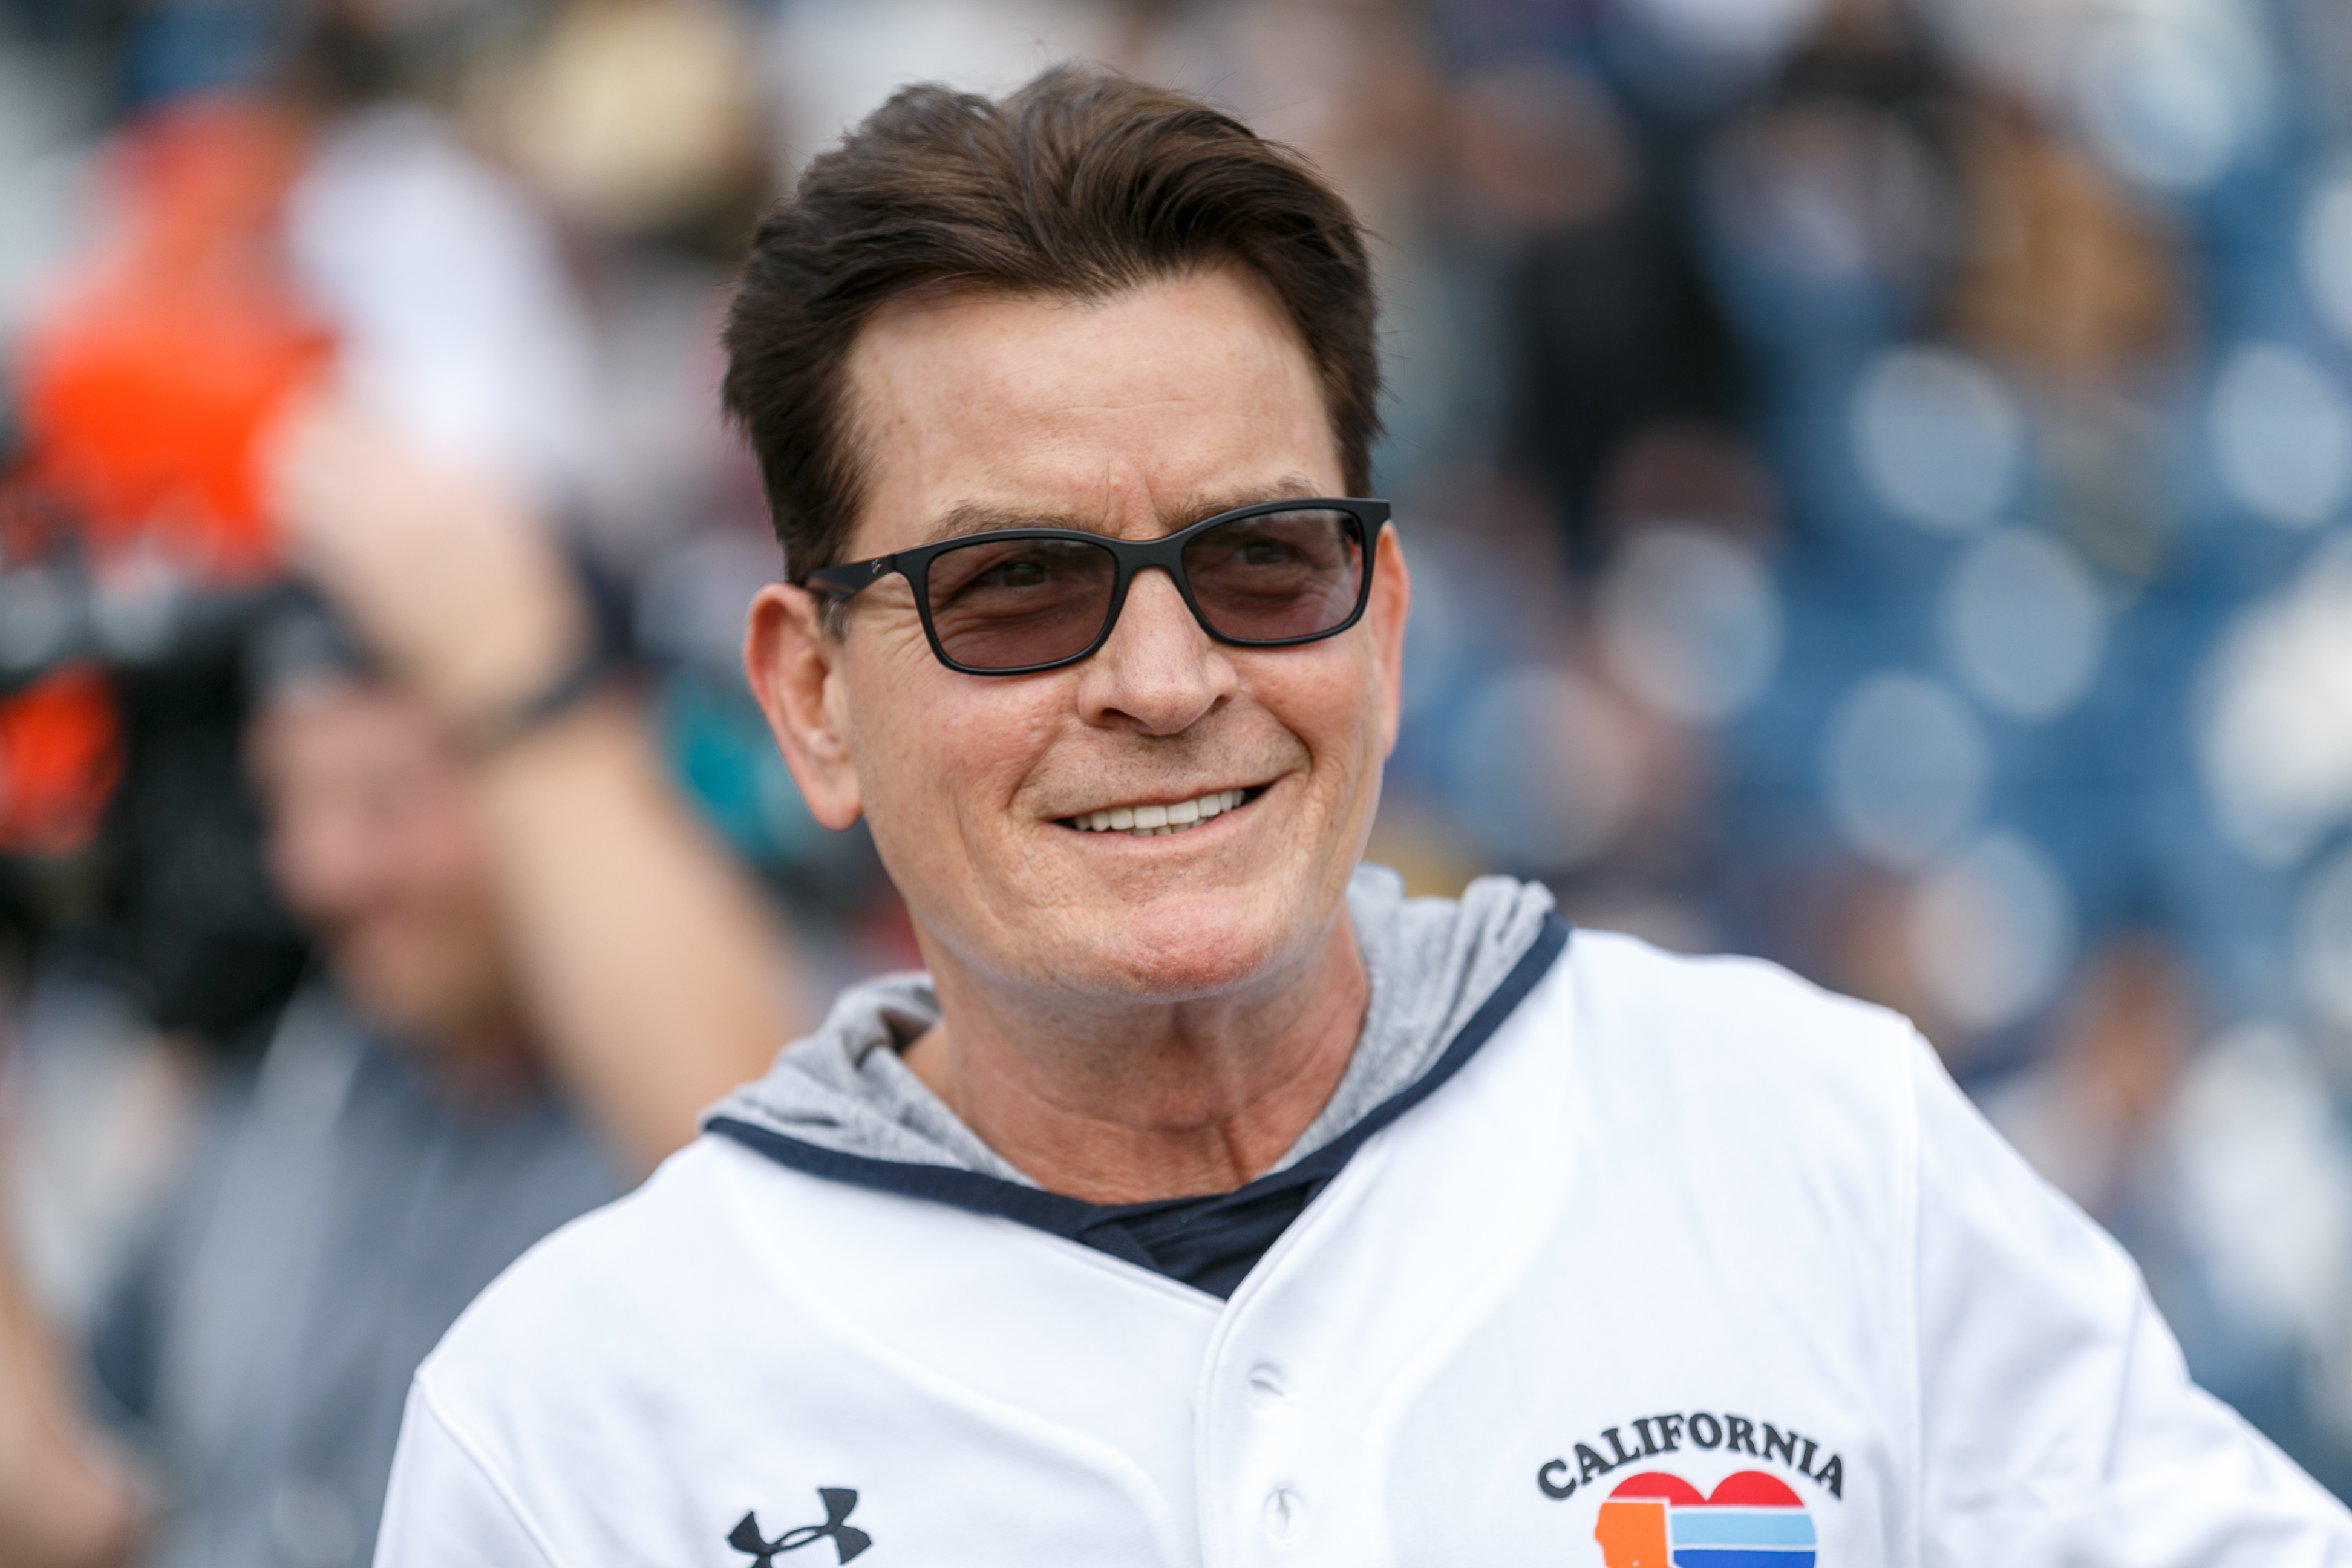 Charlie Sheen attends a softball game on January 13, 2019 | Source: Getty Images